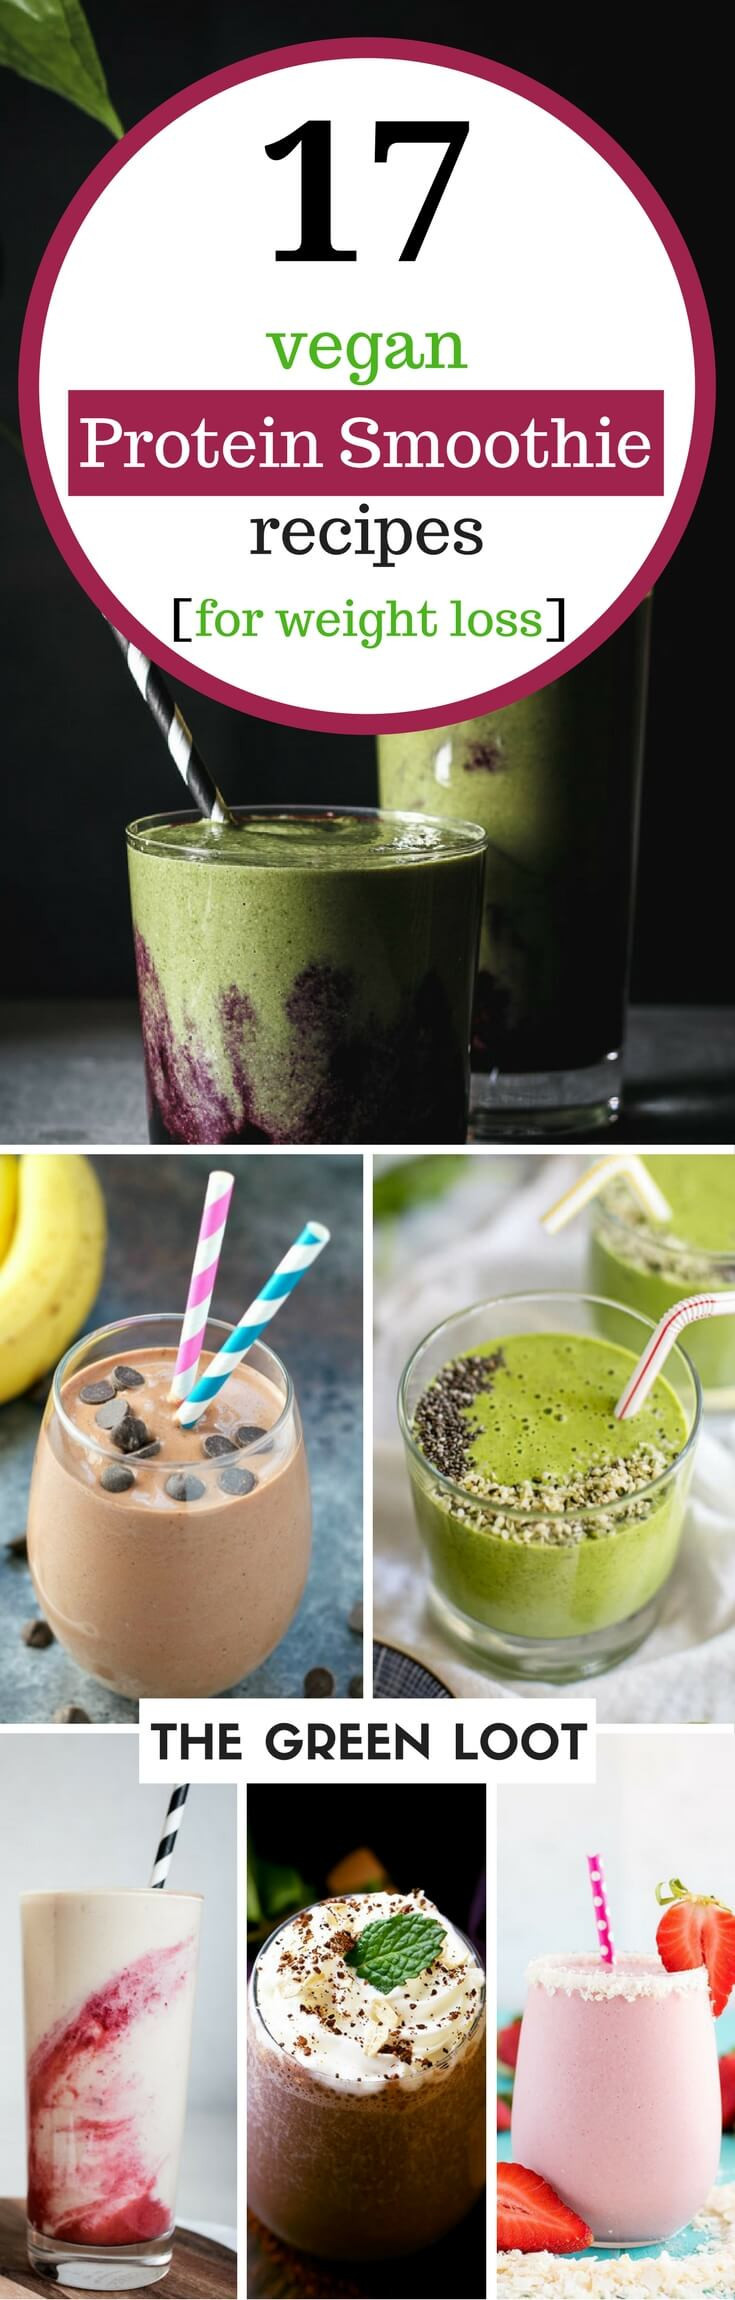 Weight Loss Smoothie Recipes Free
 The Best Dairy Free Weight Loss Smoothies Best Round Up